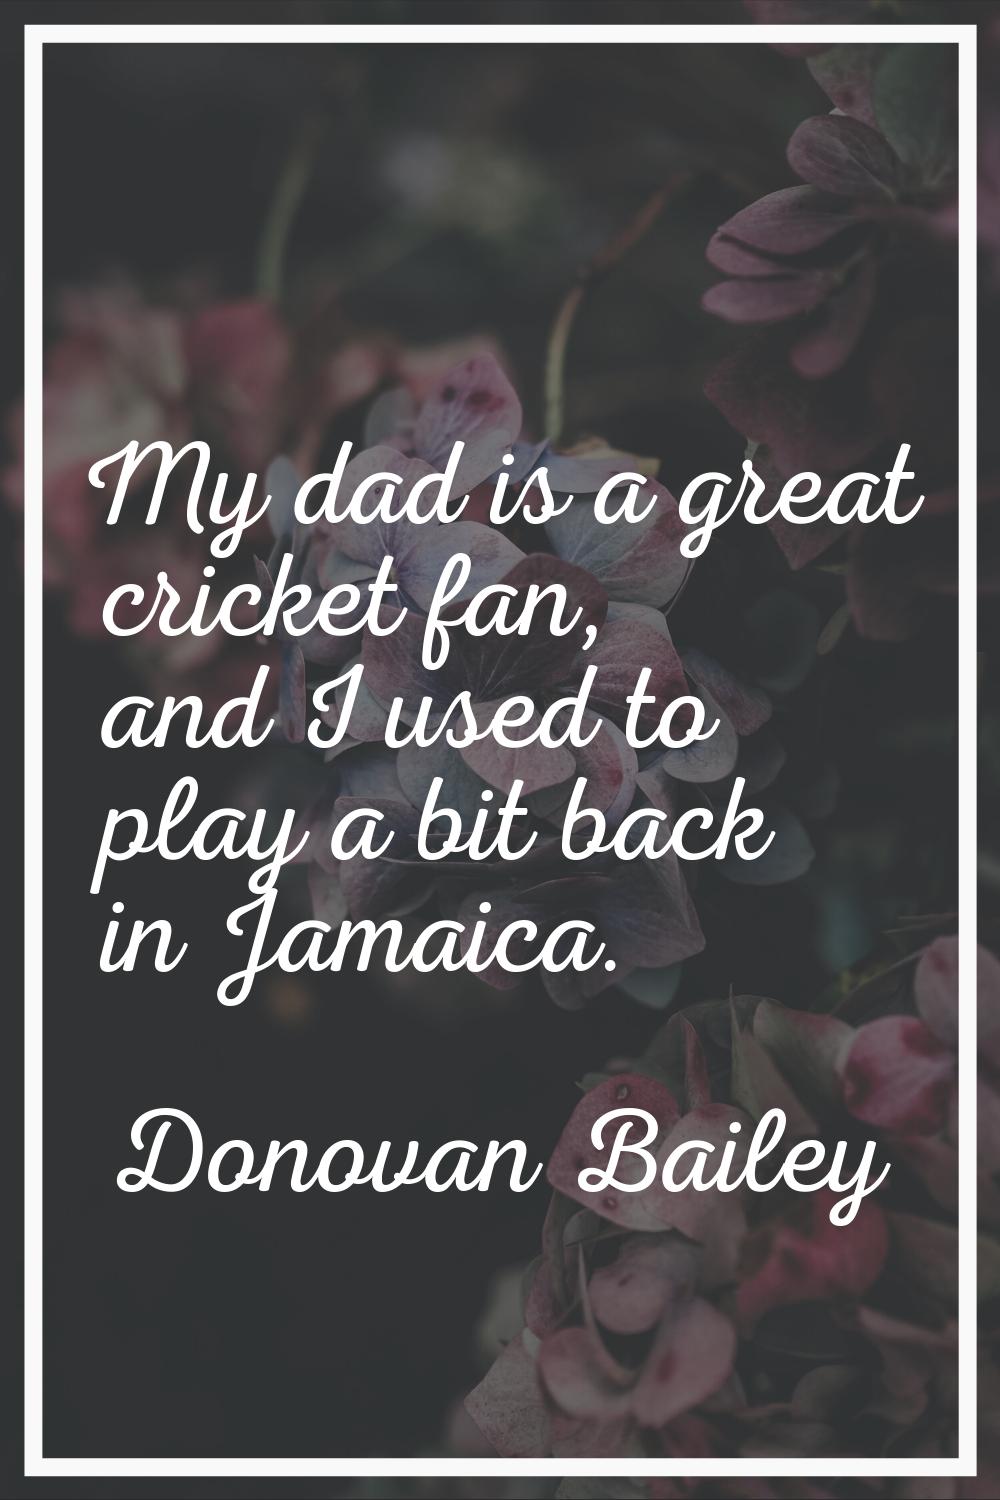 My dad is a great cricket fan, and I used to play a bit back in Jamaica.